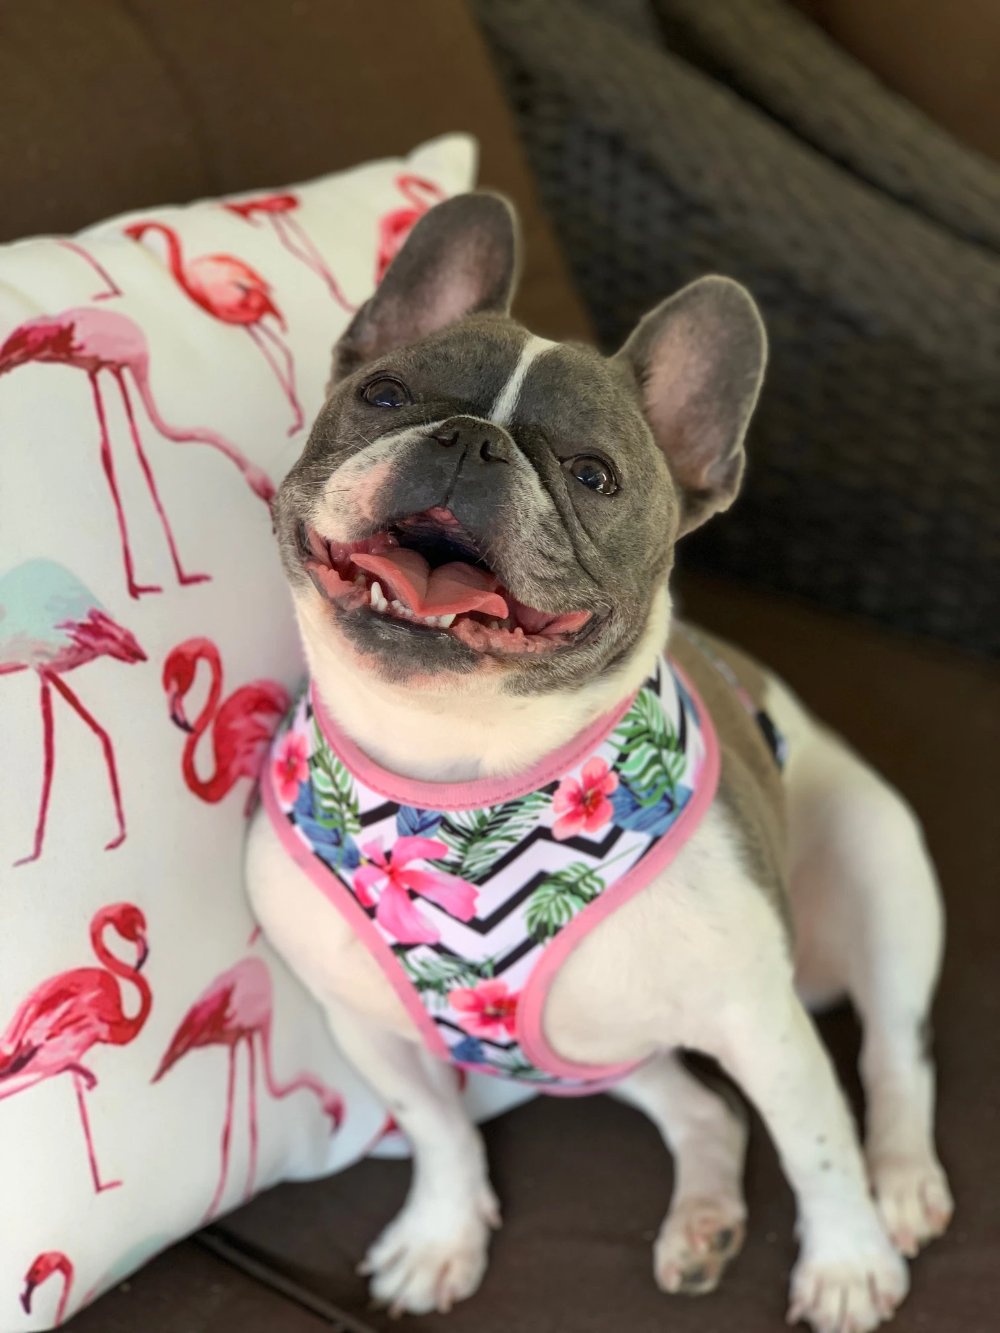 Frenchie Supply Harness - Floral